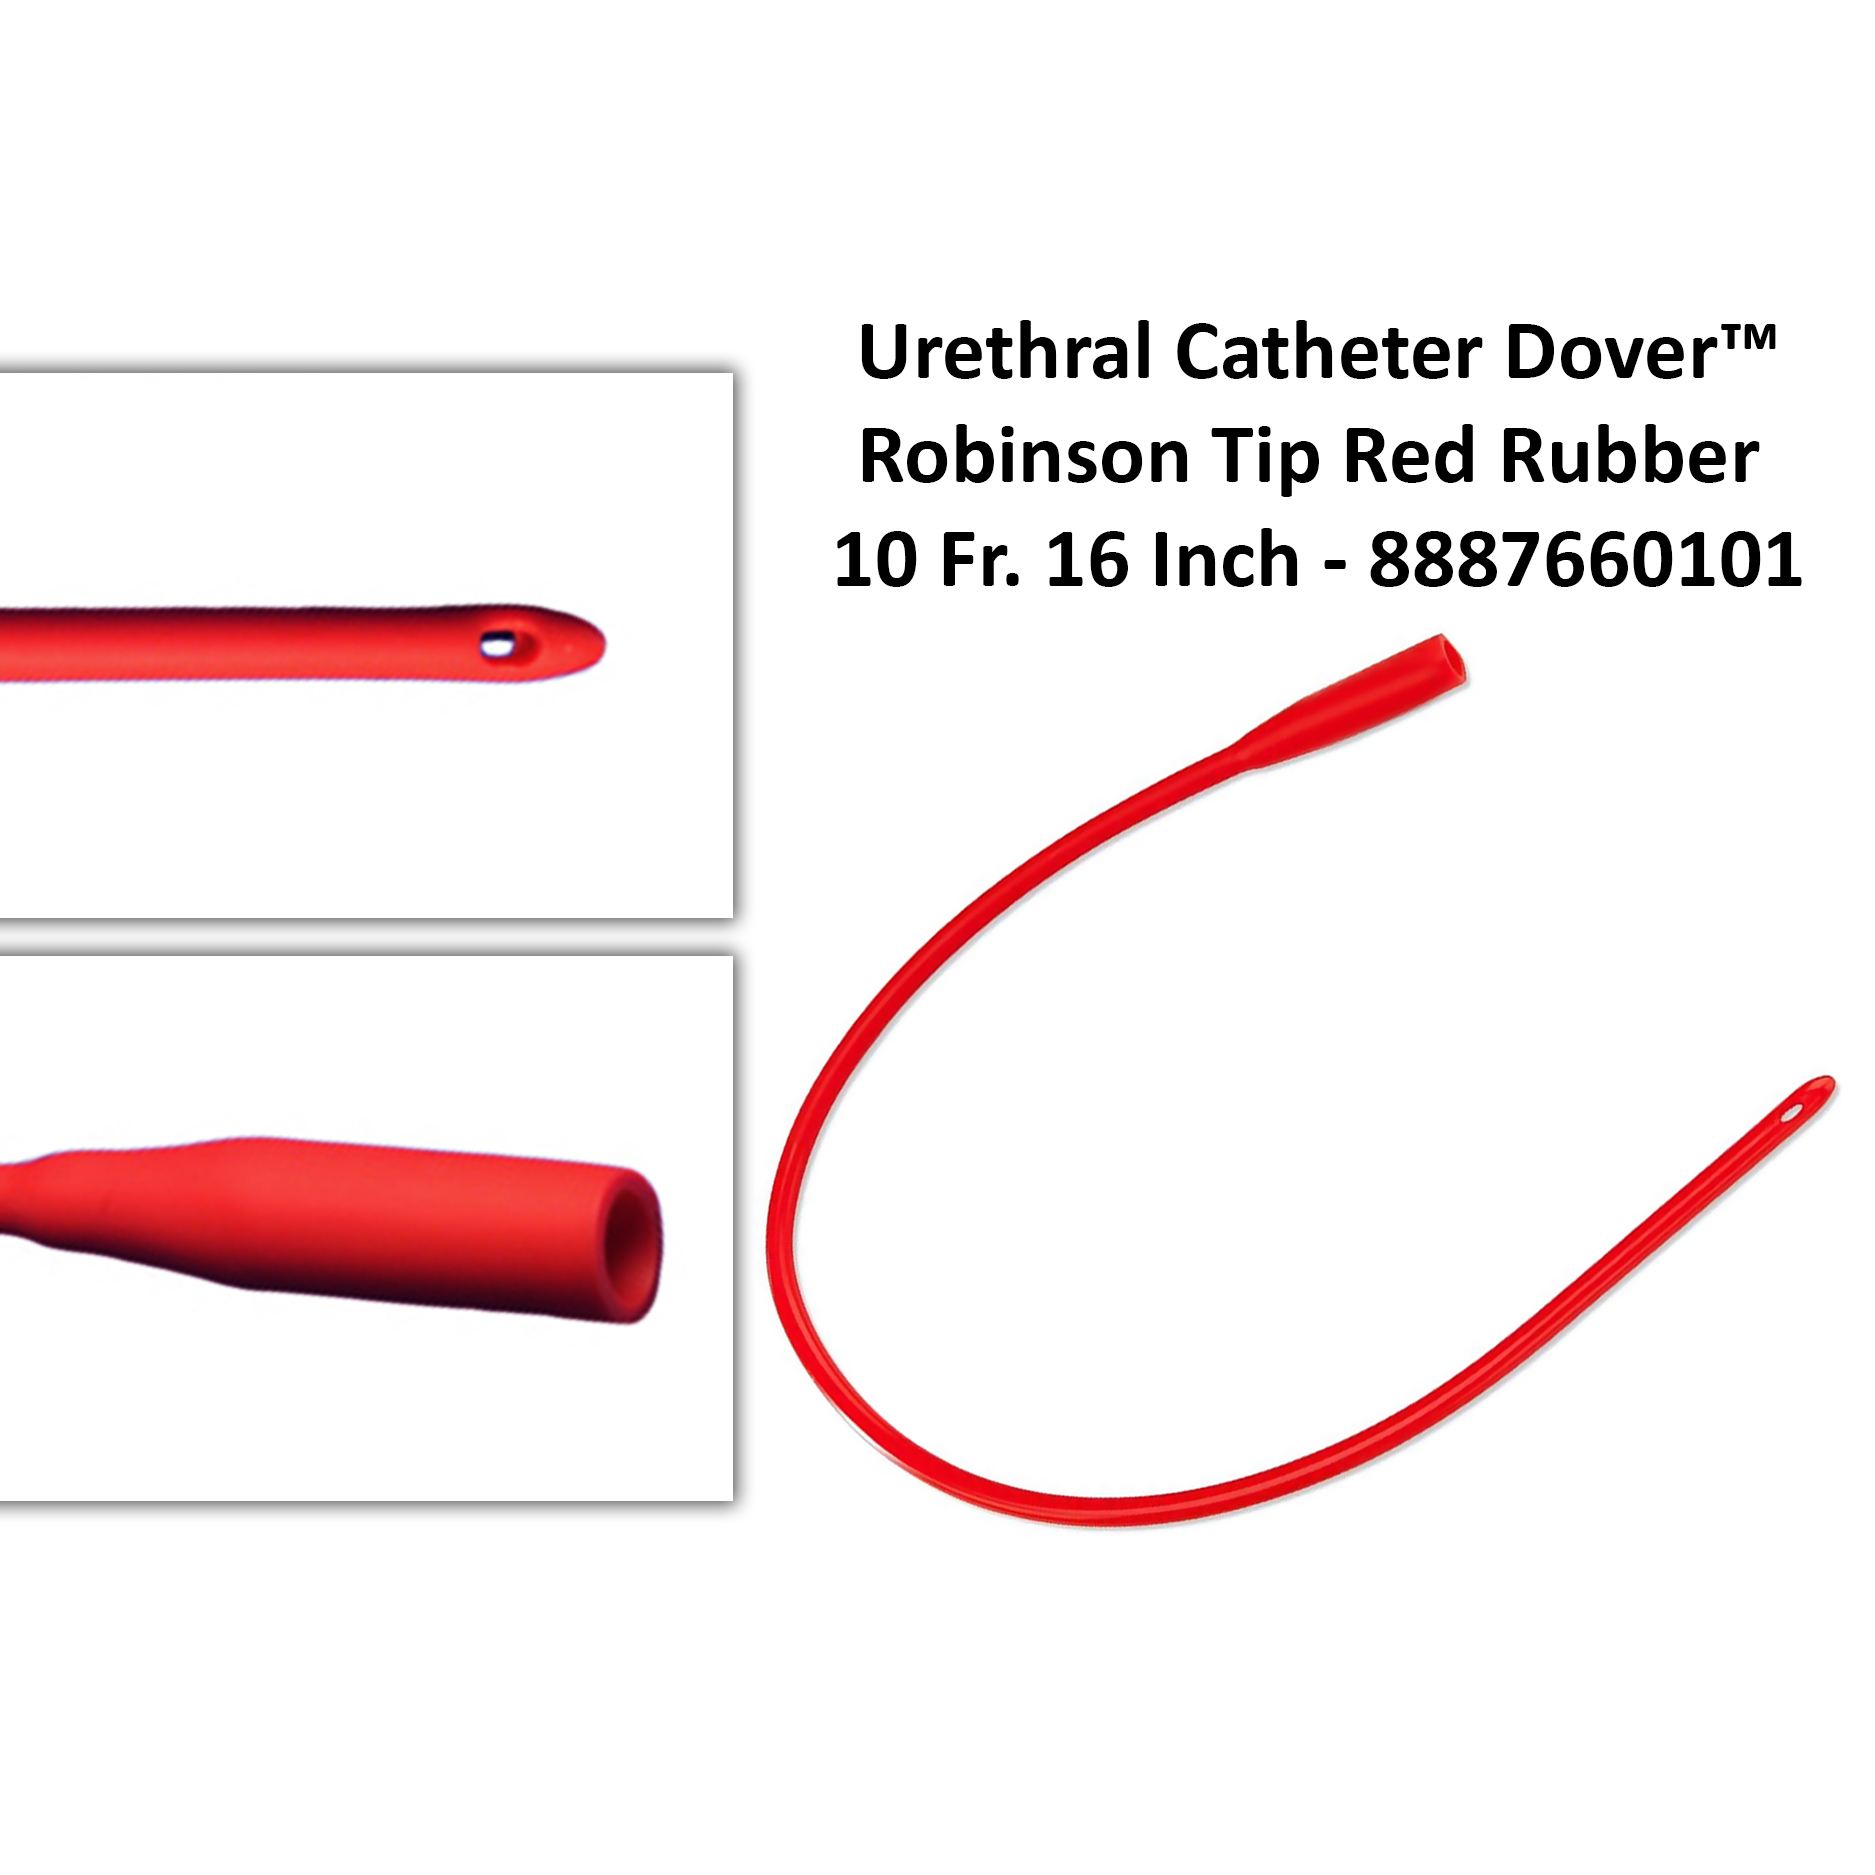 Urethral Catheter Dover™ Robinson Tip Red Rubber 10 Fr. 16 Inch - 8887660101 Michigan | USA